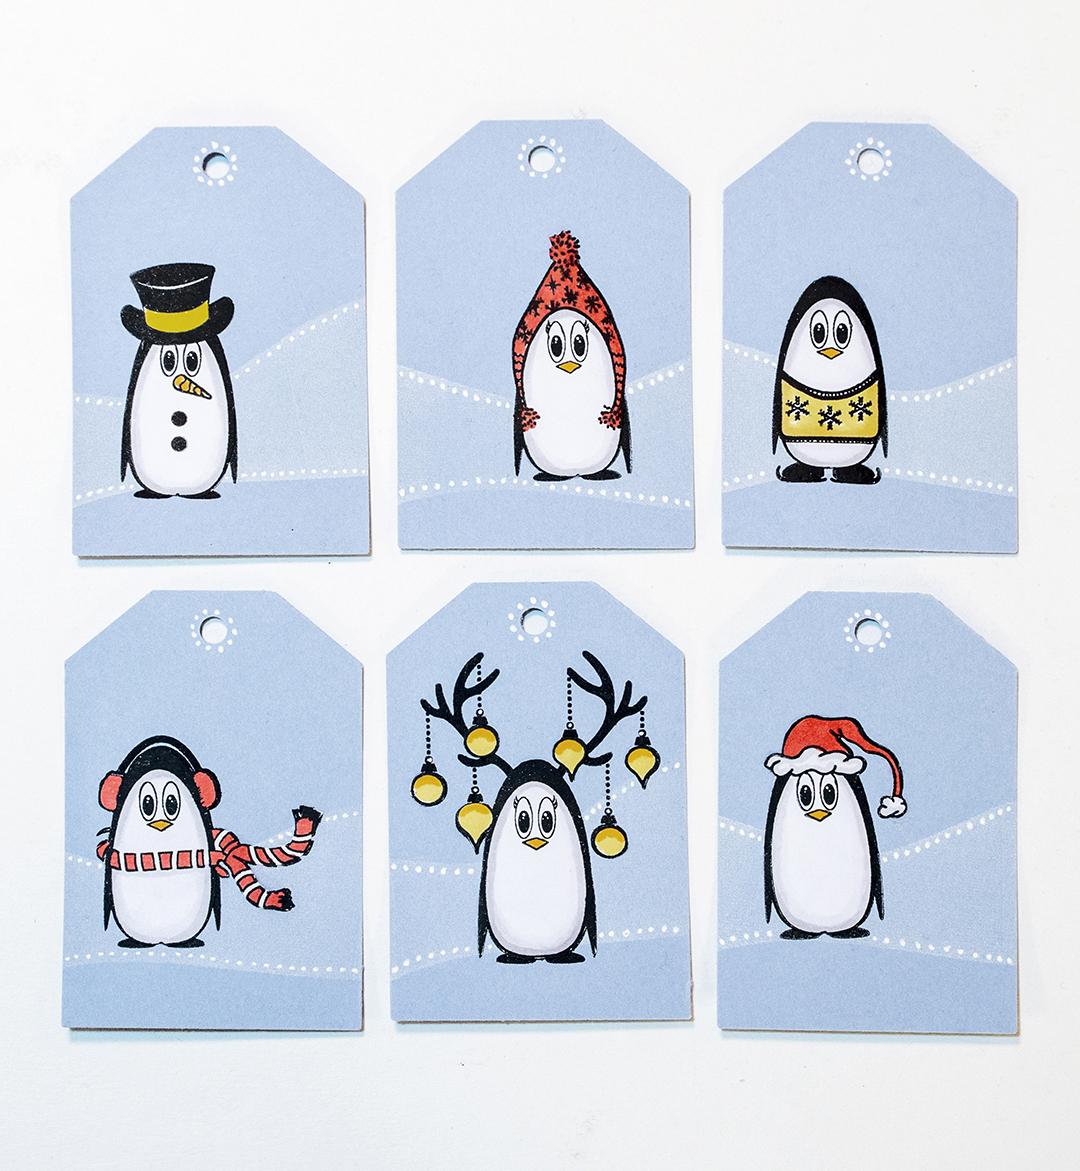 Use StazOn Pigment in Snowflake to Create Christmas Gift Tags